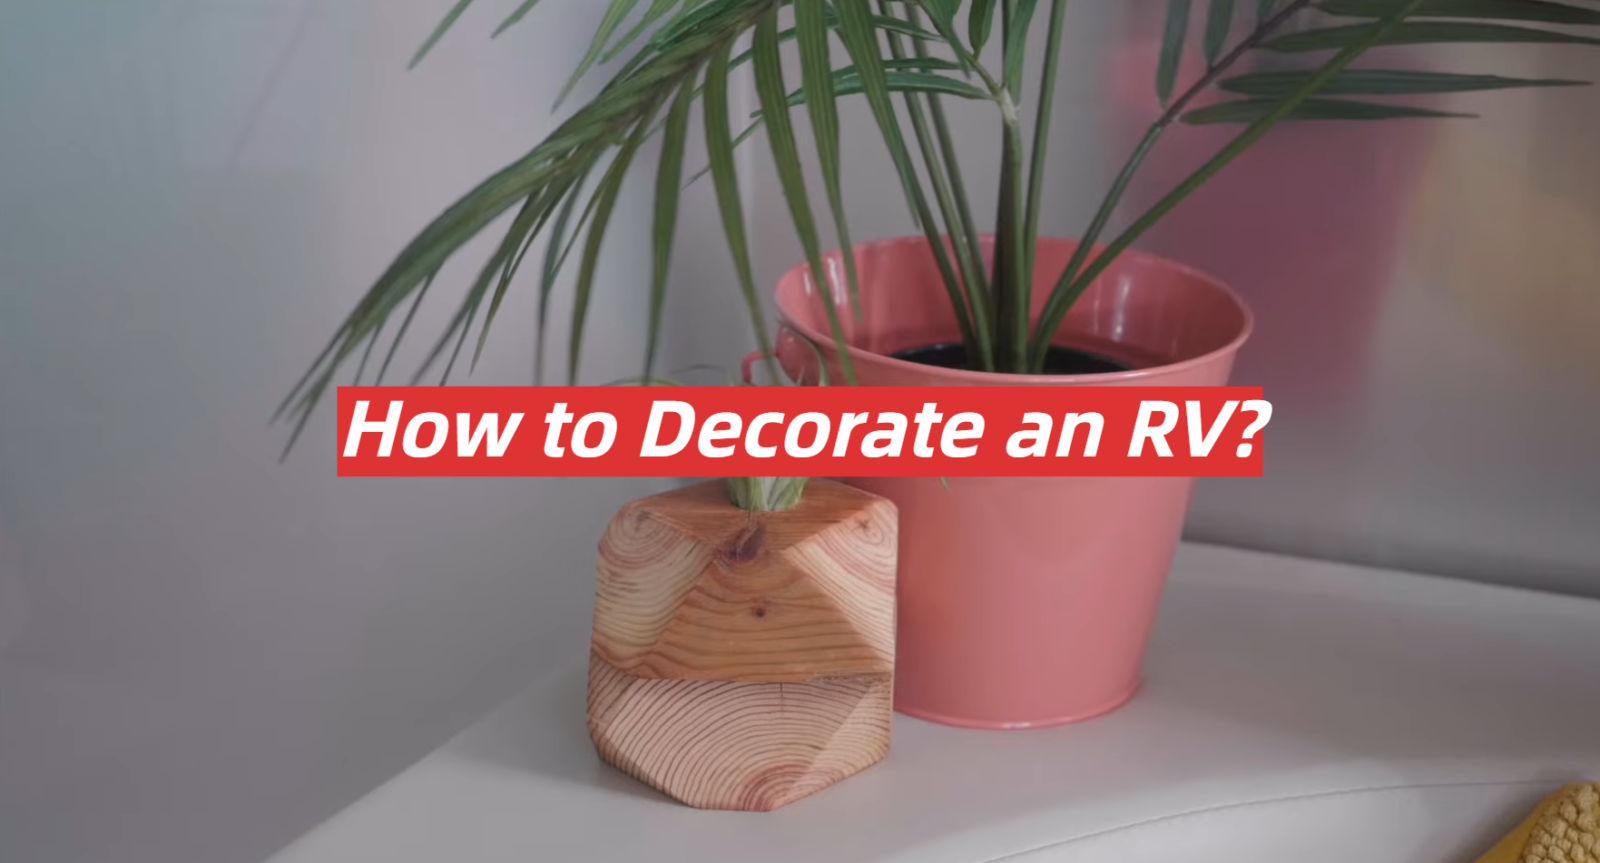 How to Decorate an RV?